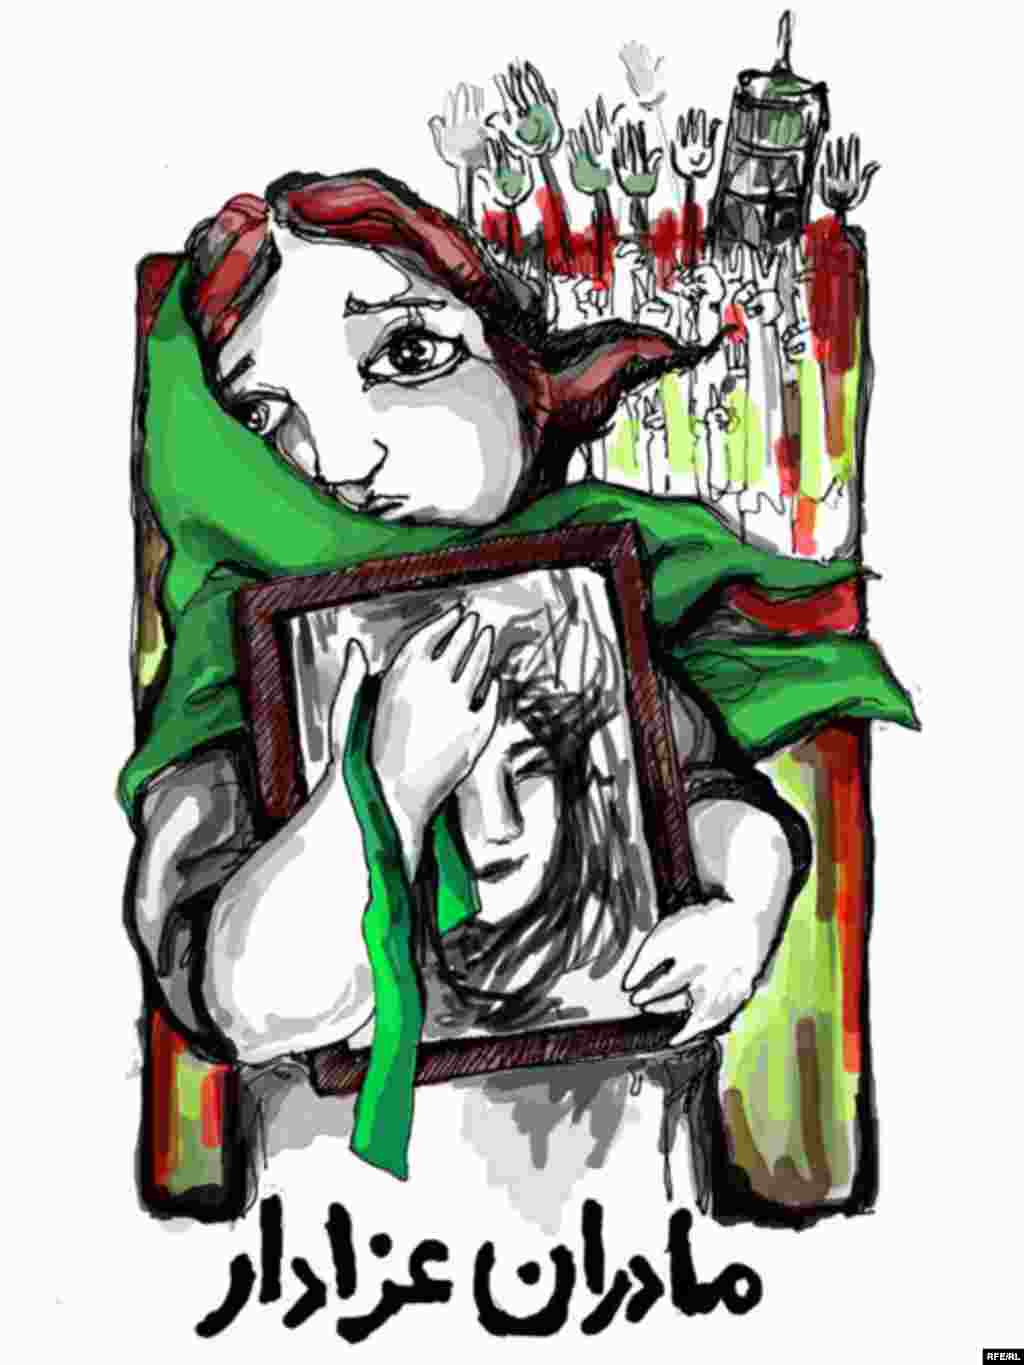 Iran's Election Unrest: An Artist's View #12